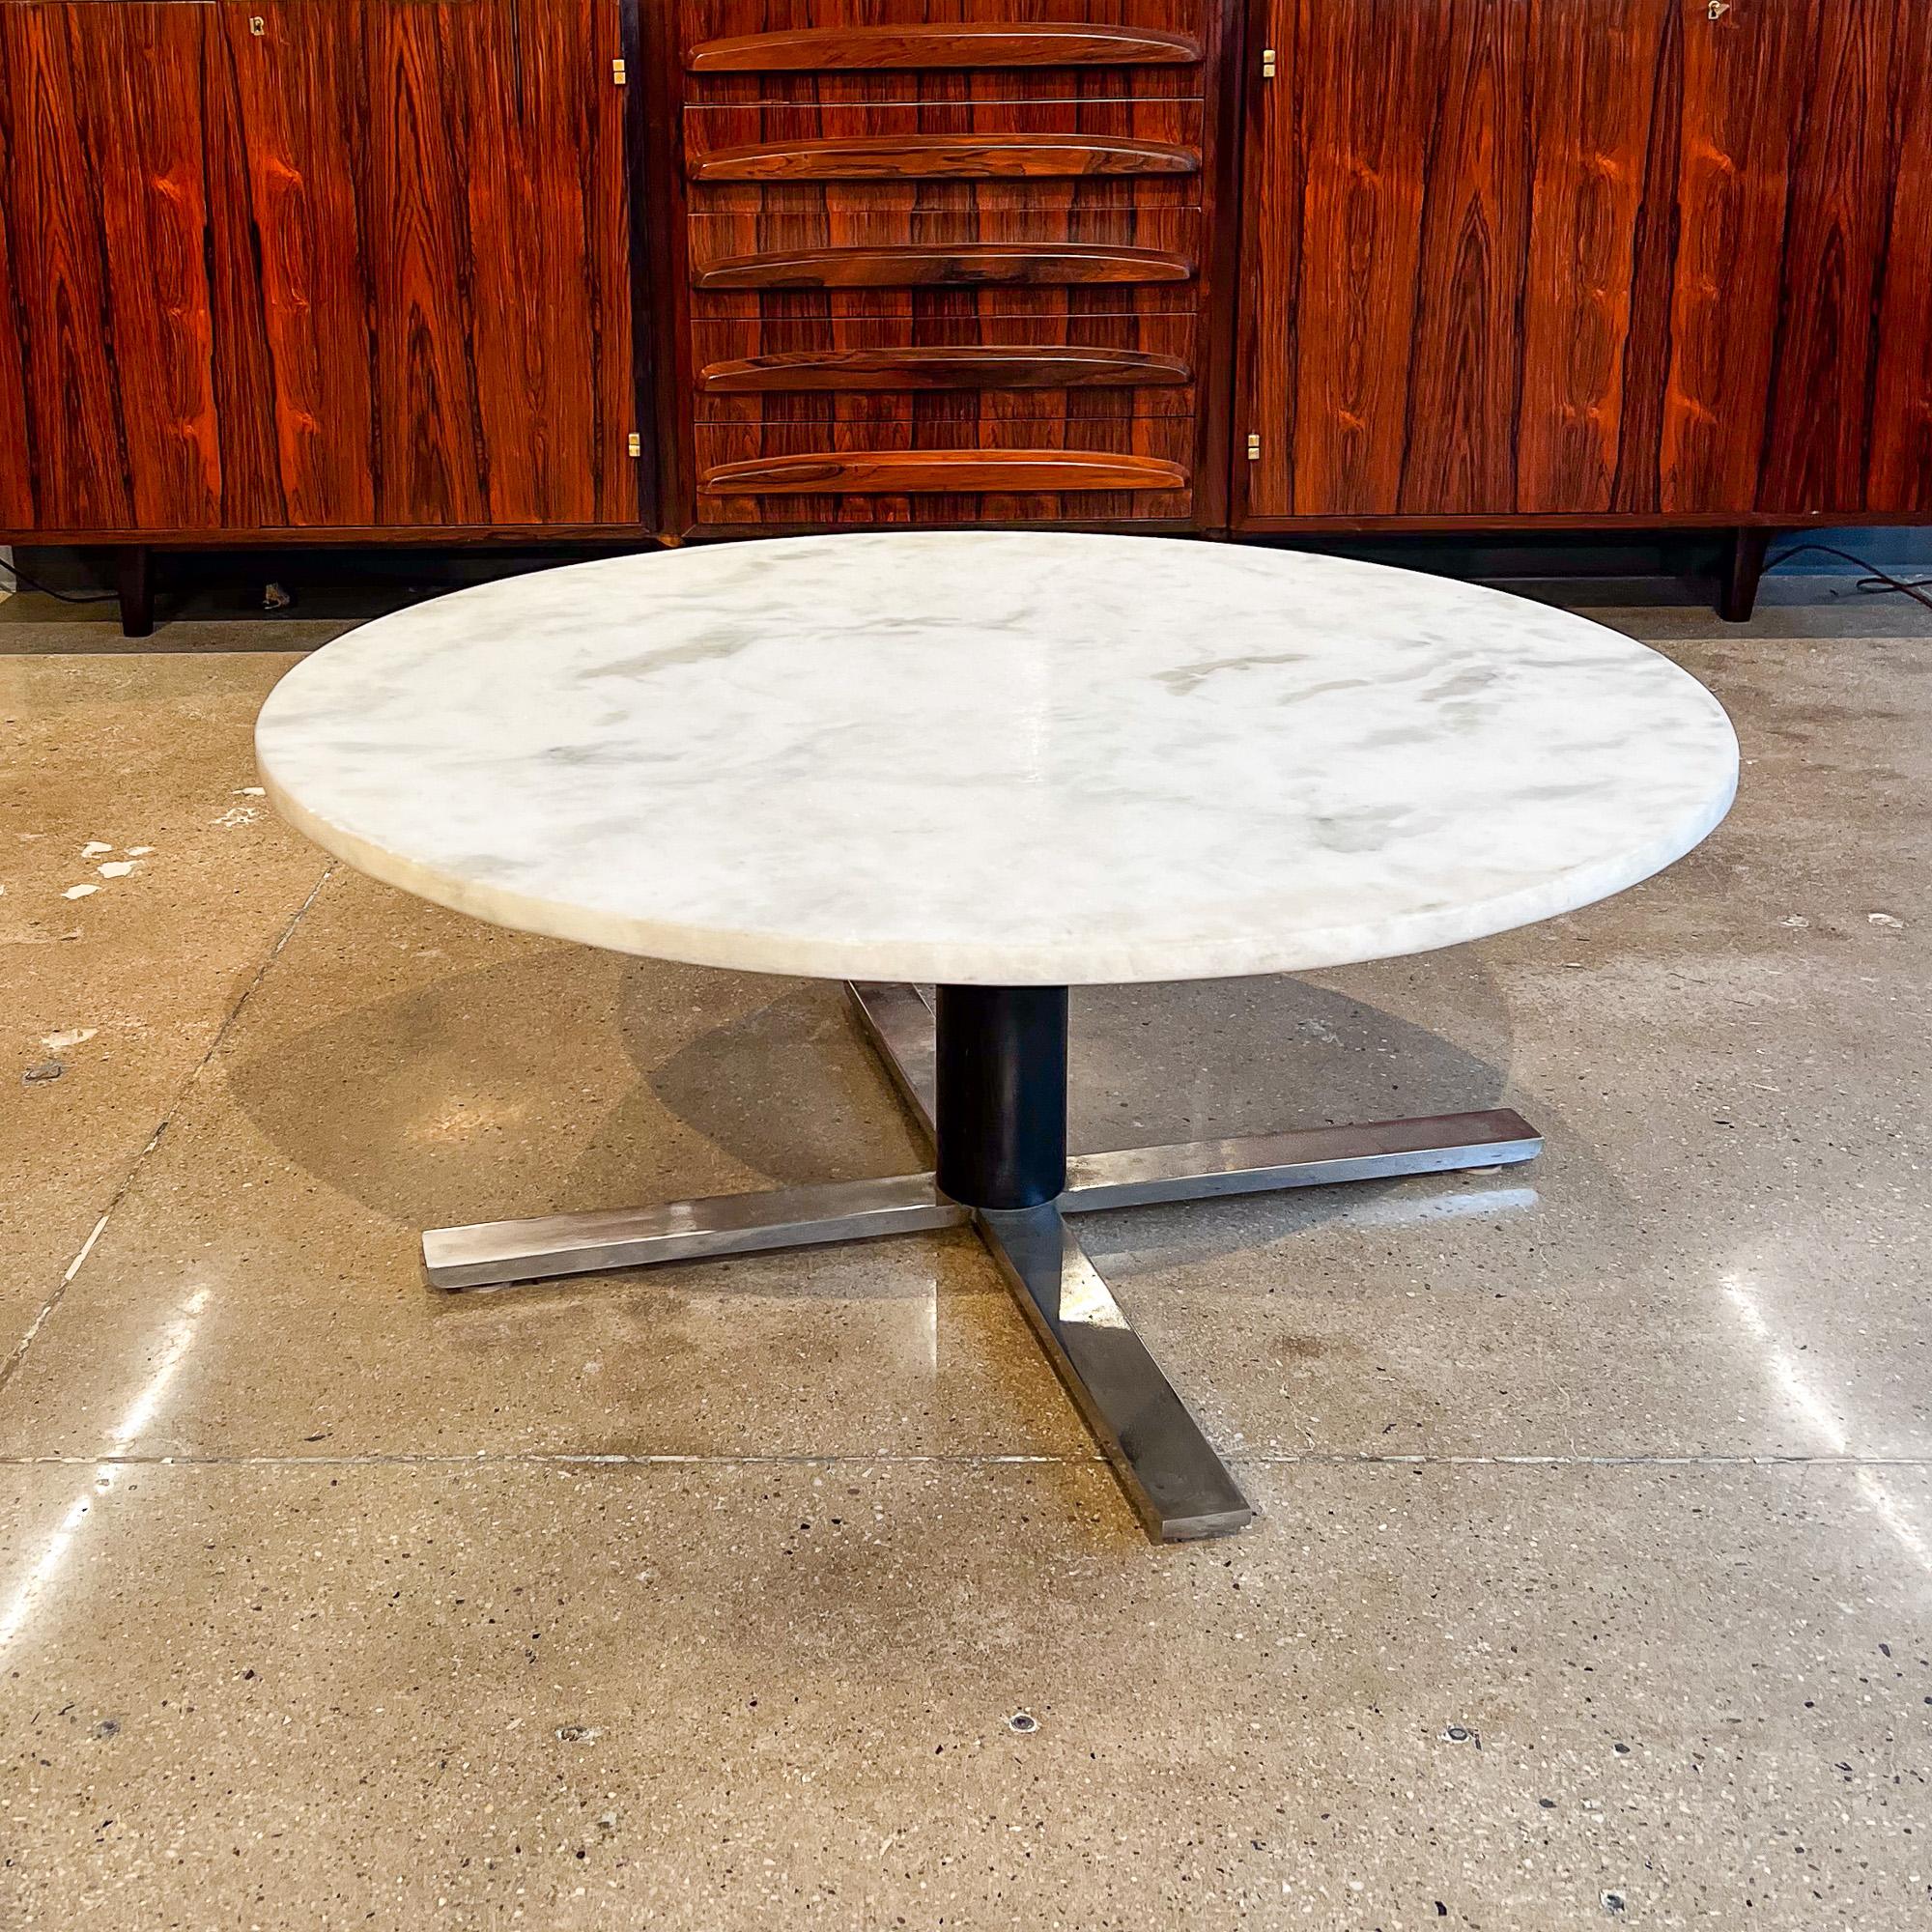 Metalwork “Chancellor” Coffee Table with Marble Top by Jorge Zalszupin, c. 1960